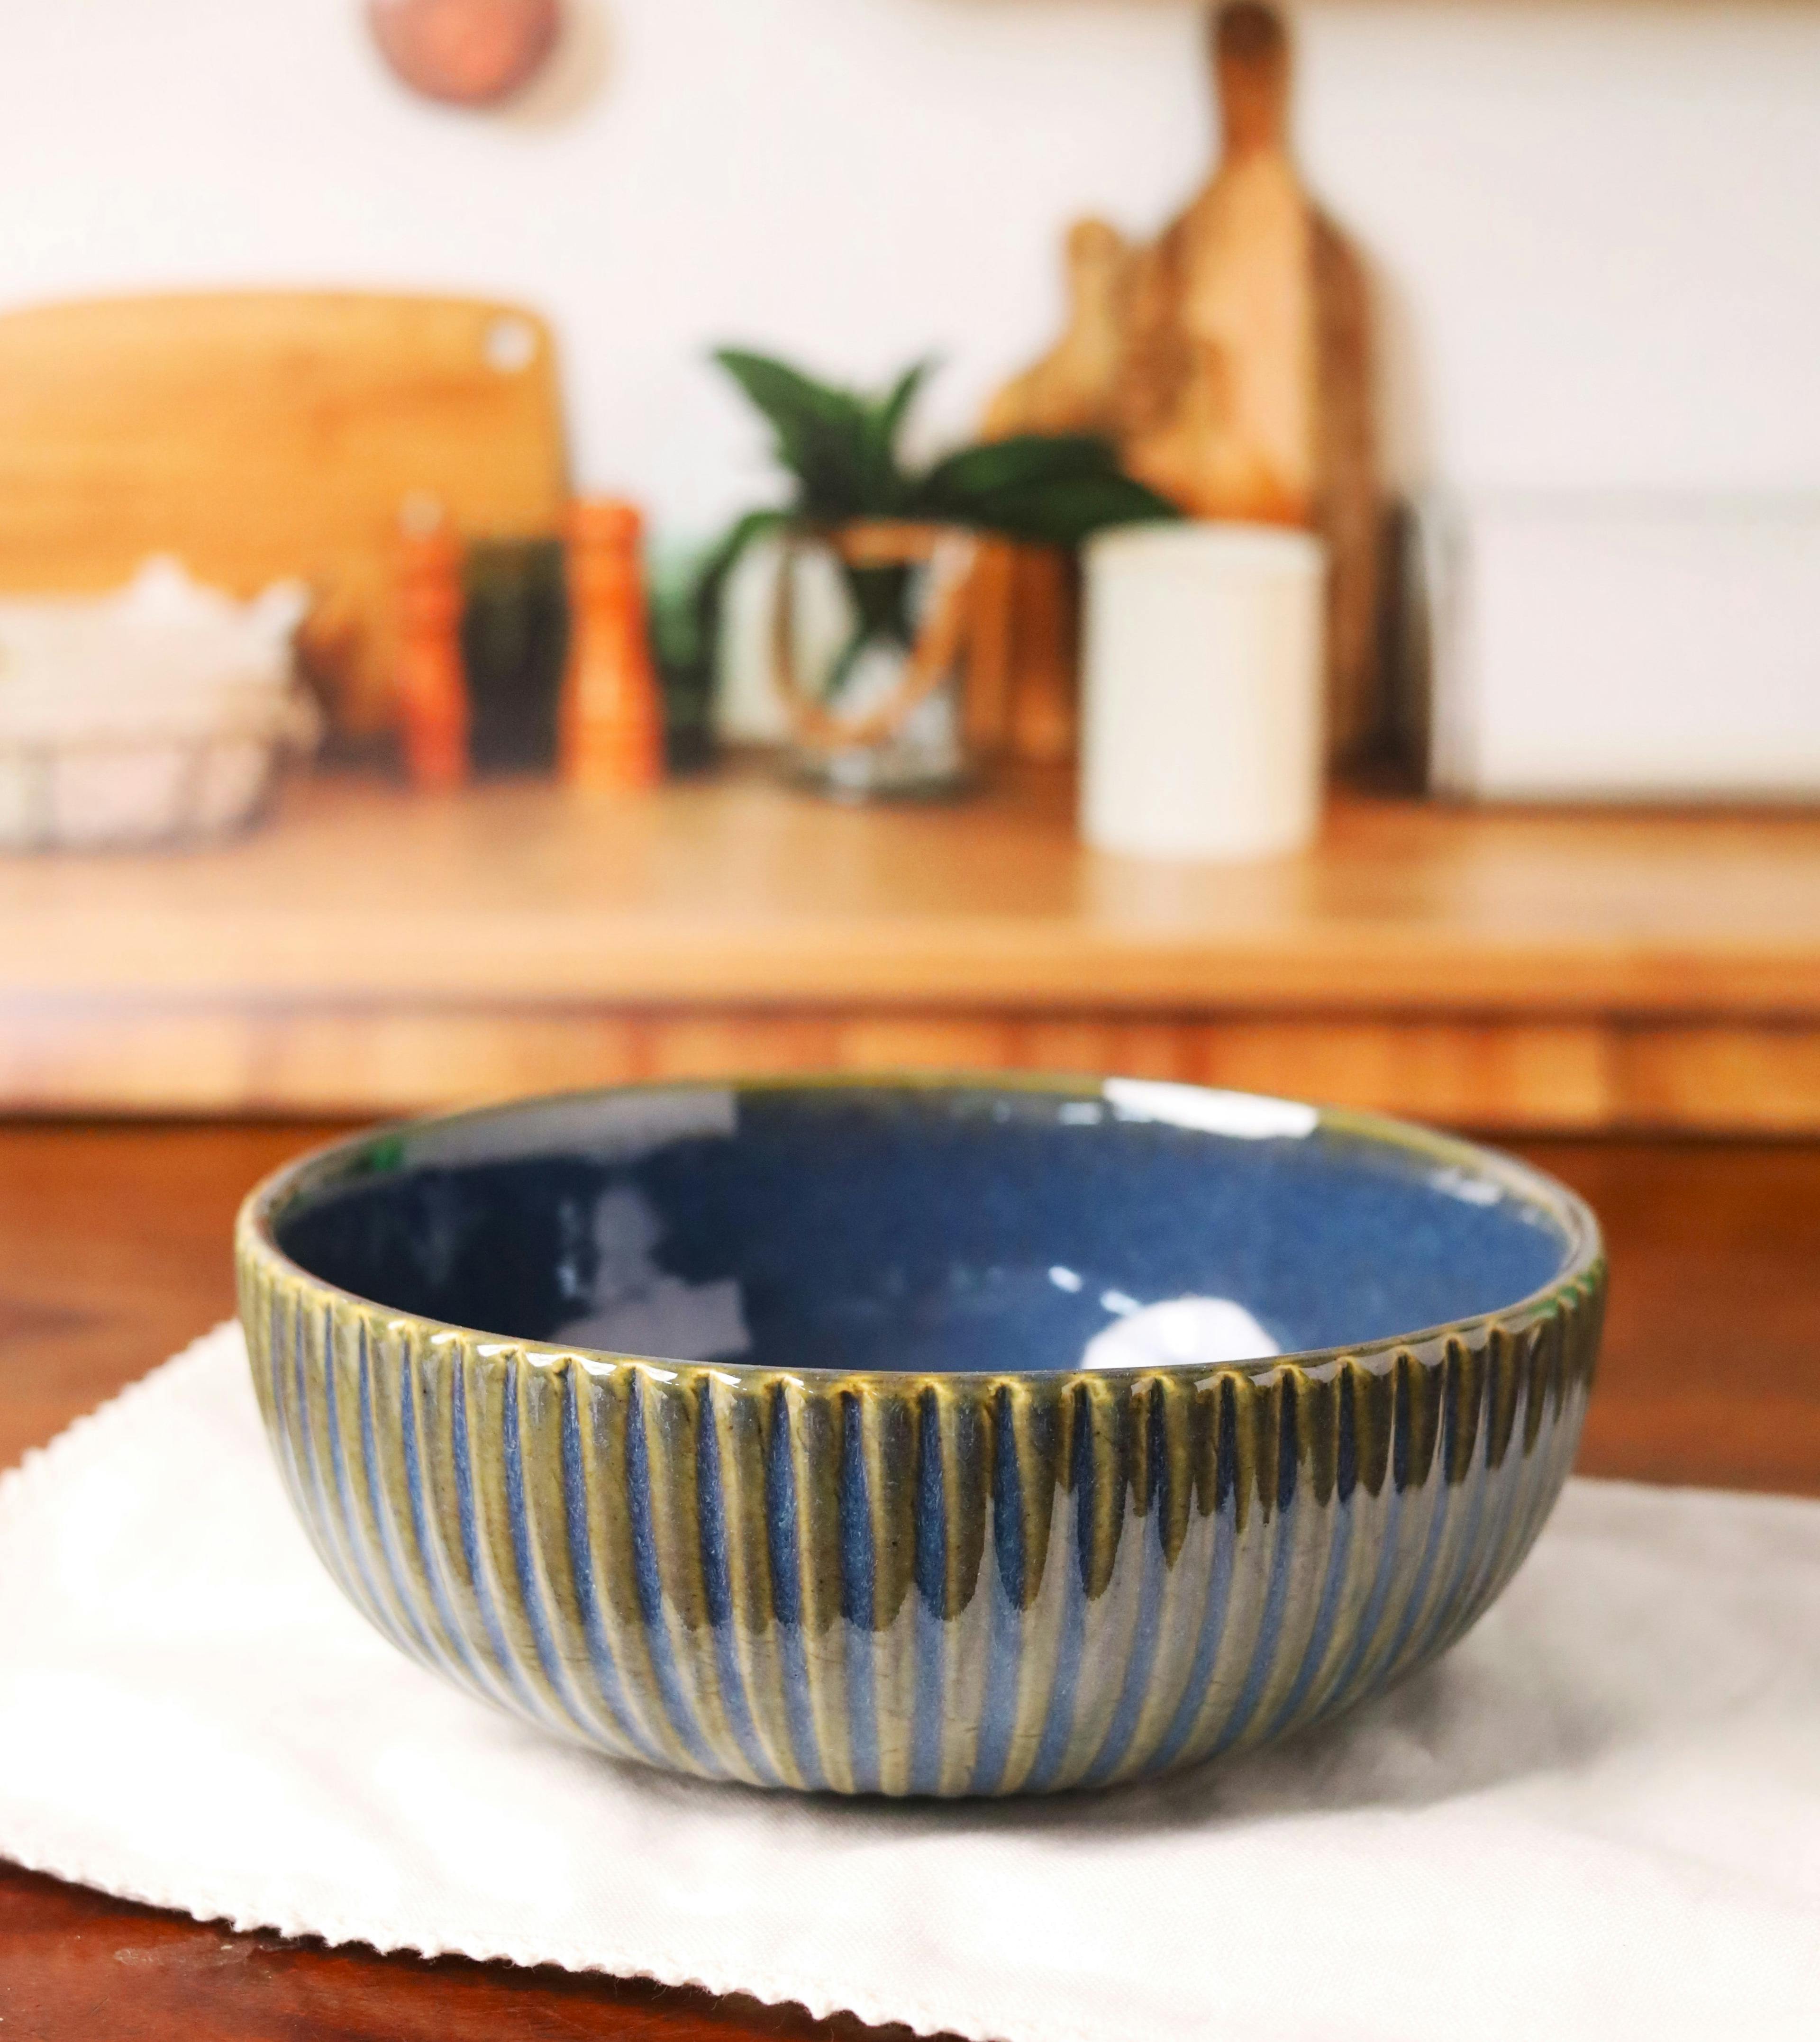 Blue Fluted Studio Pottery Serving Bowl, a product by Olive Home accent